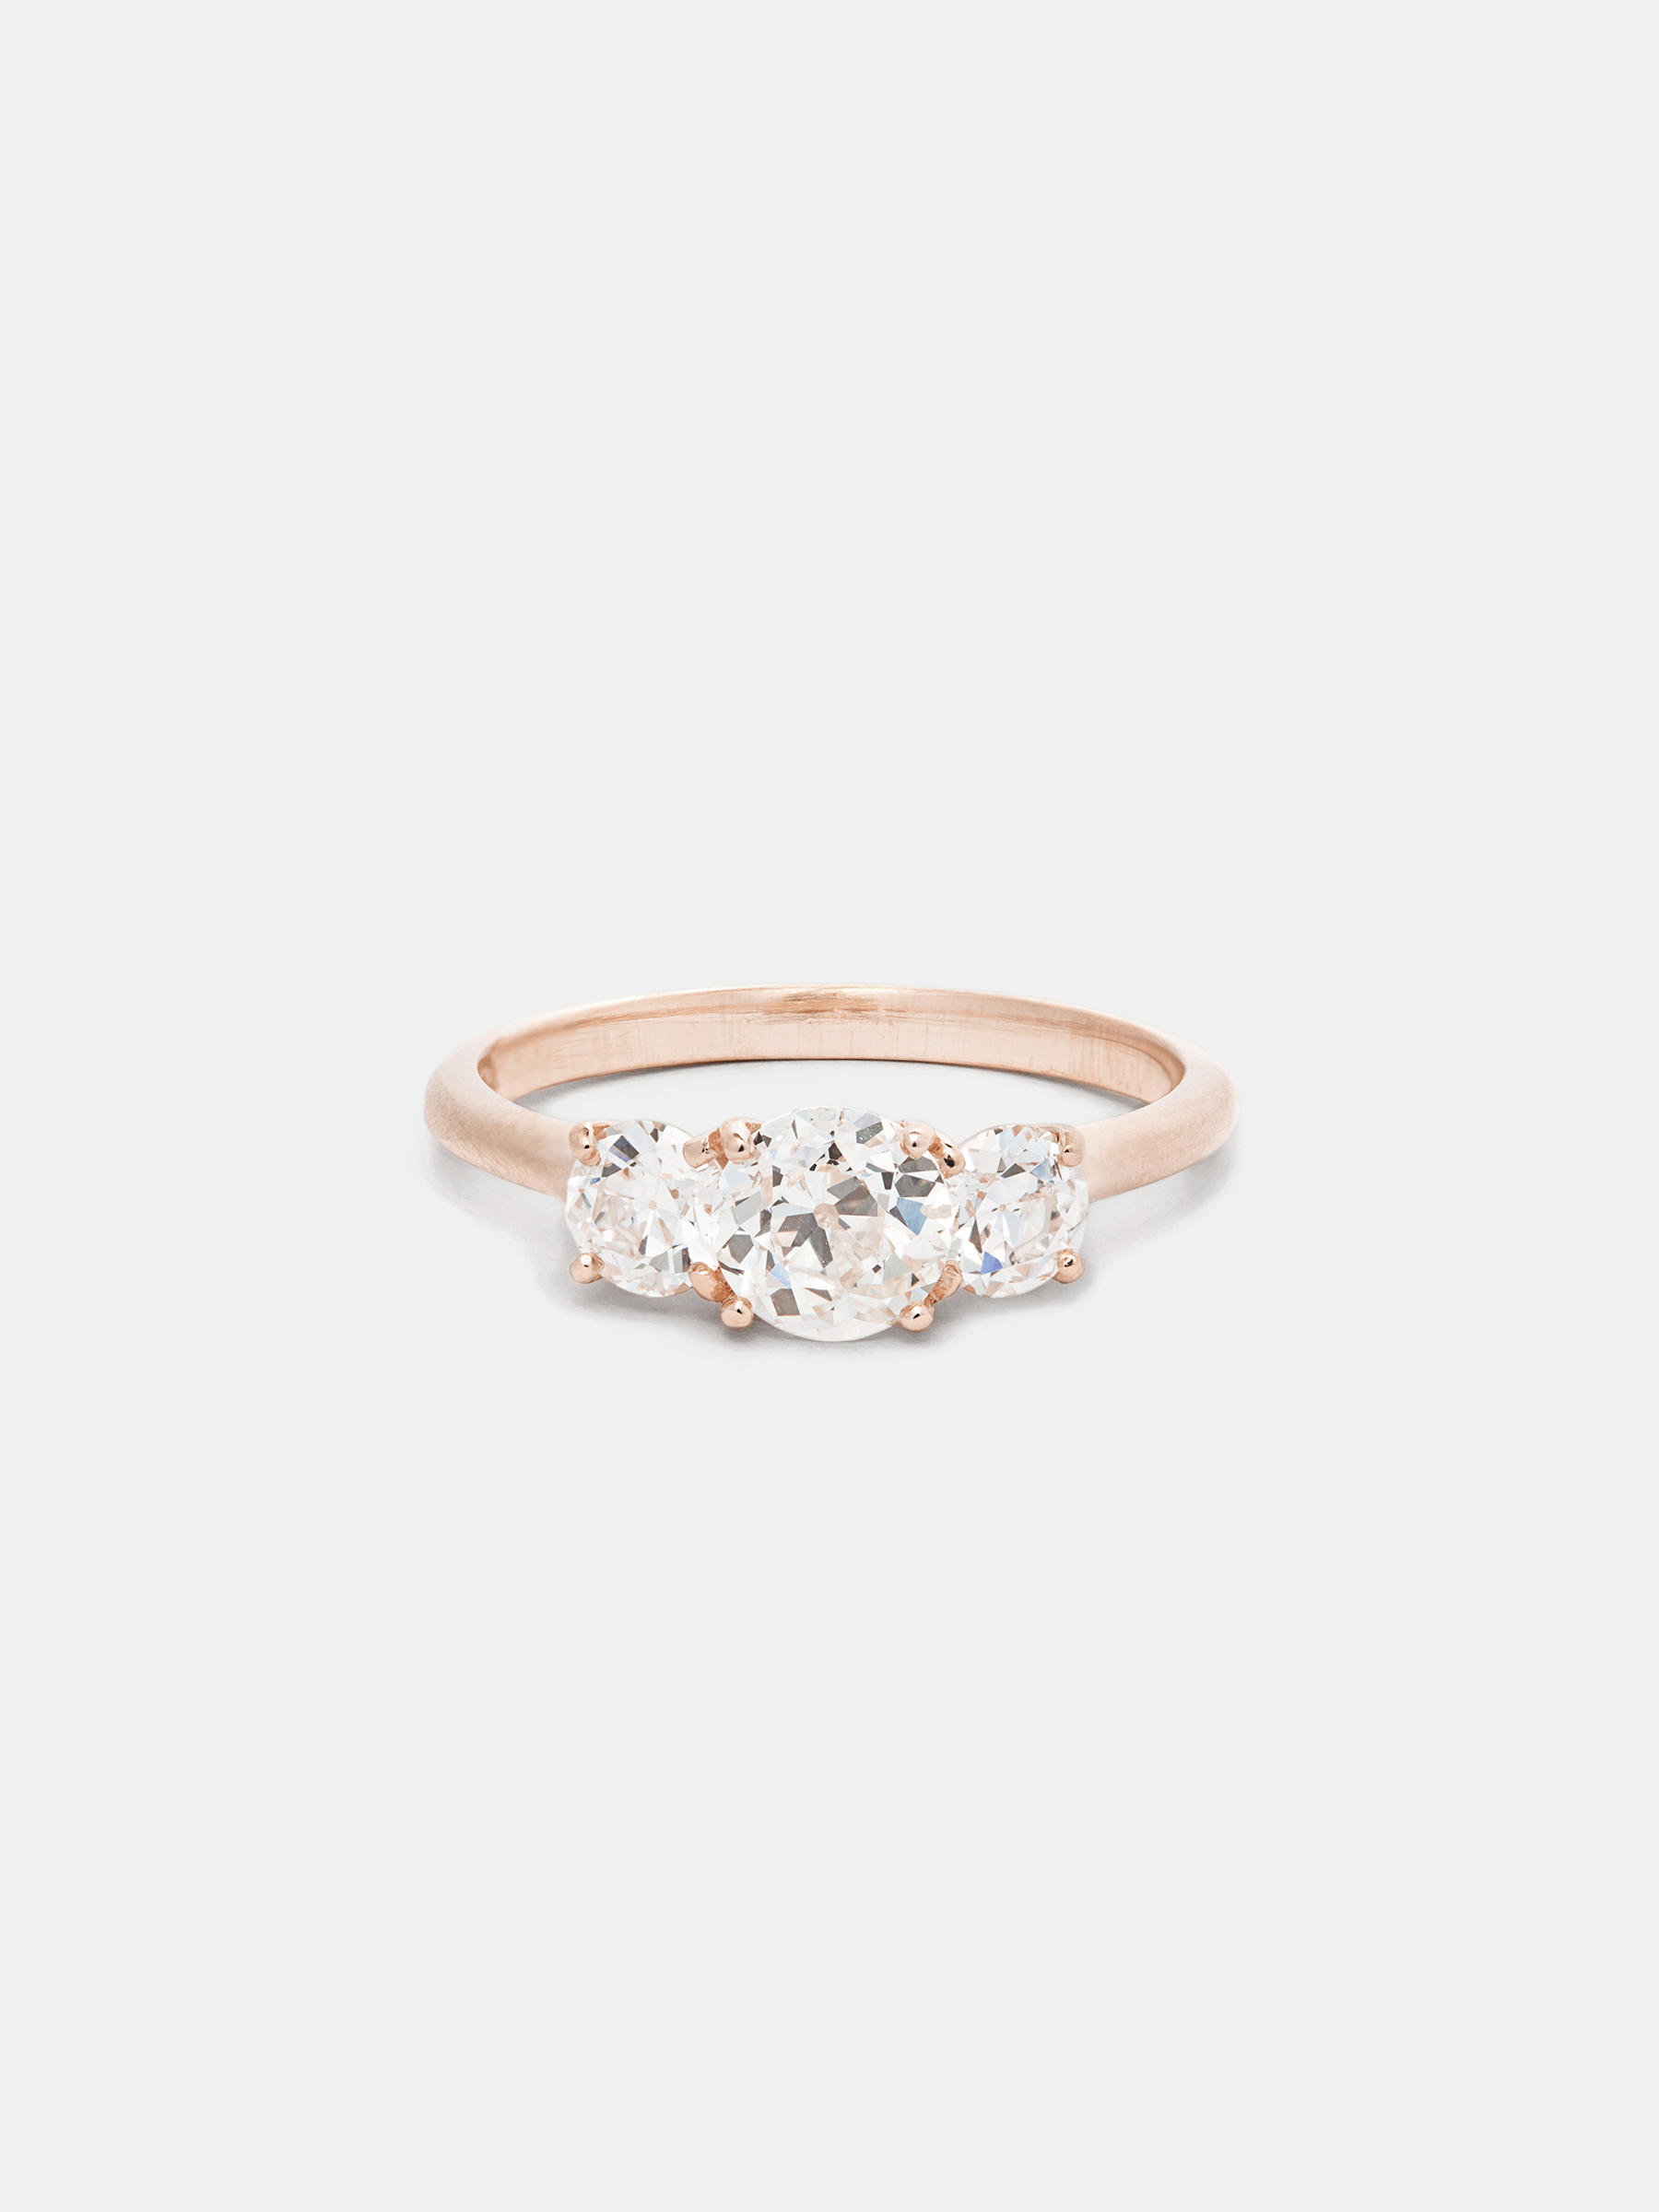 Vega 3 Stone Ring | Vow Collection 0.5ct Center with 0.2ct Side Stones | 0.9ct Total / Near Colorless ghij / 14K Yellow Gold